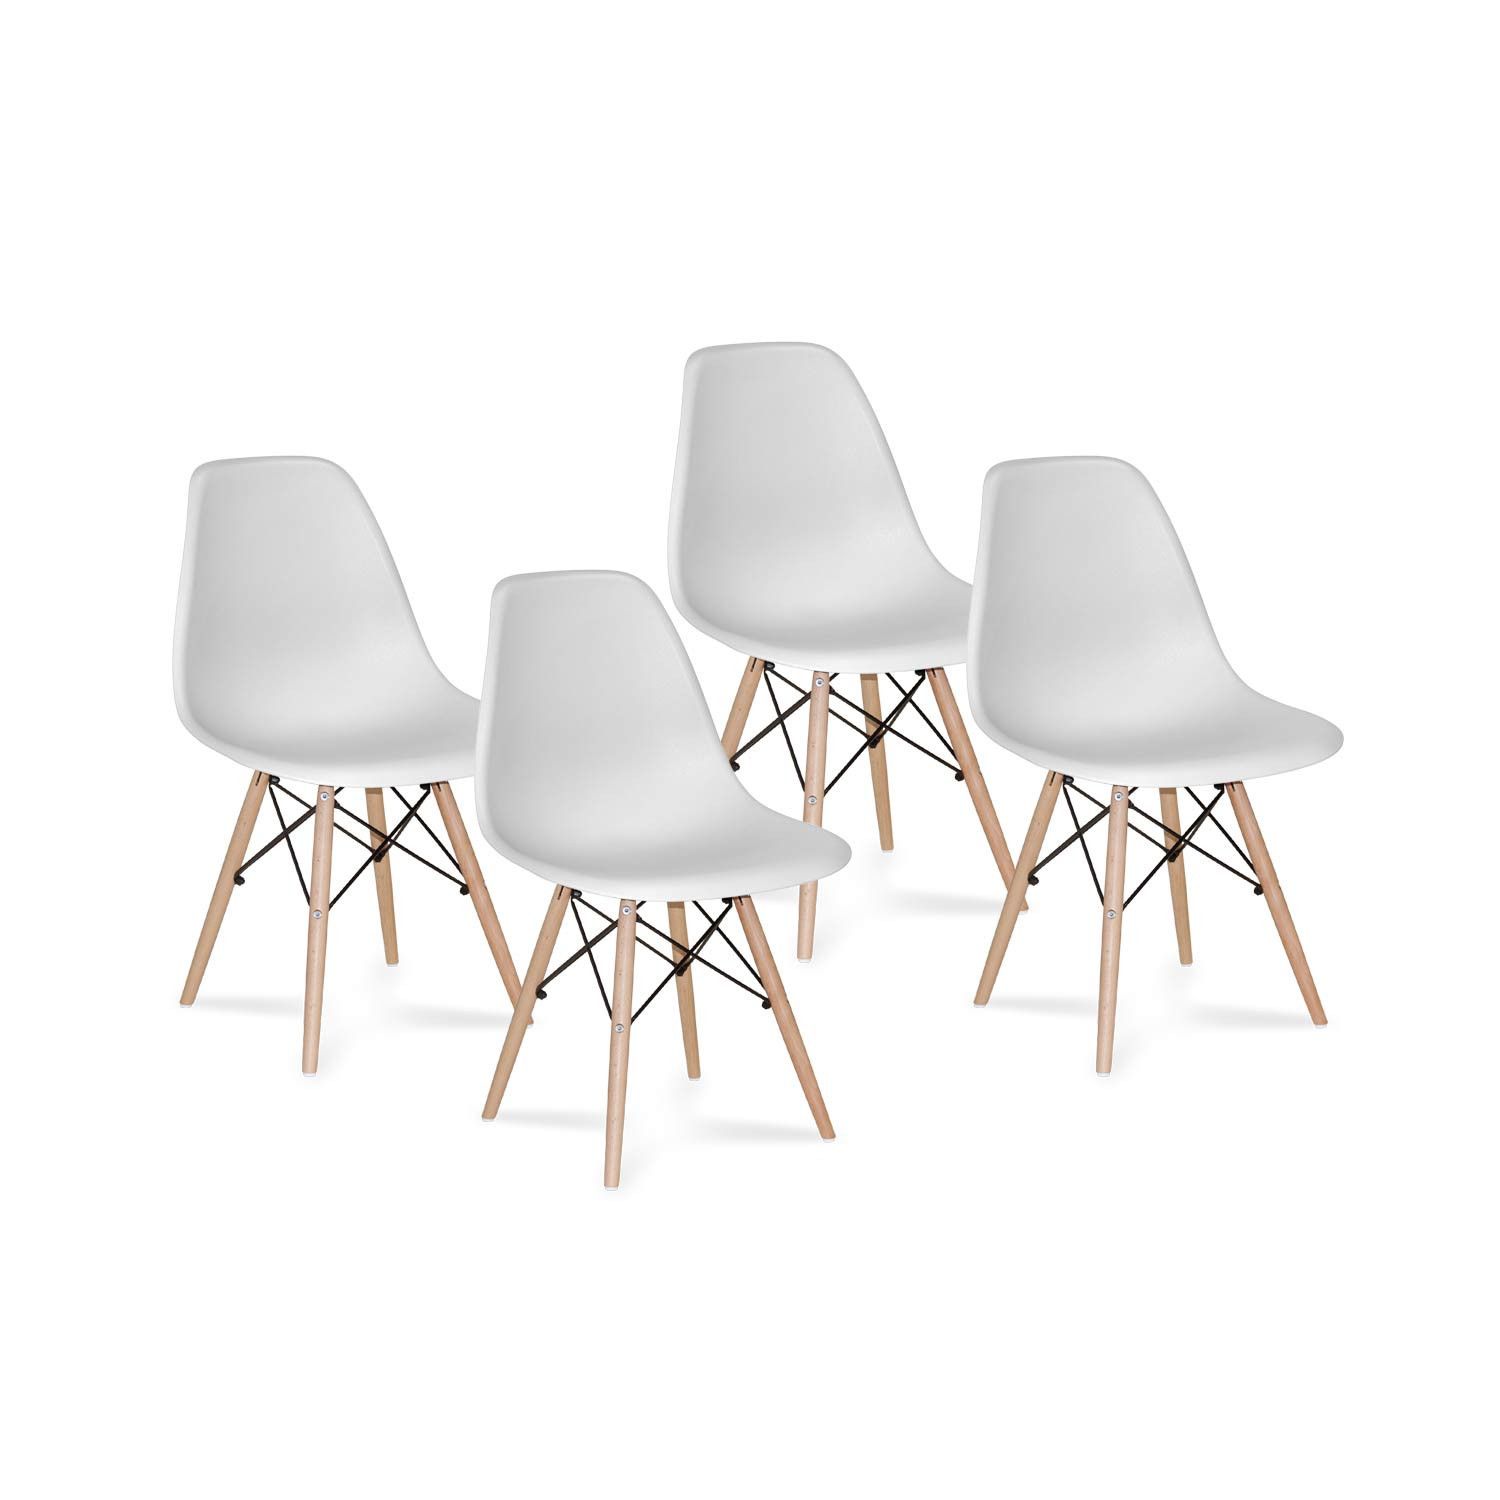 PACK 4 SILLAS TOWER WOOD BLANCA EXTRA QUALITY - Sillas Tower 